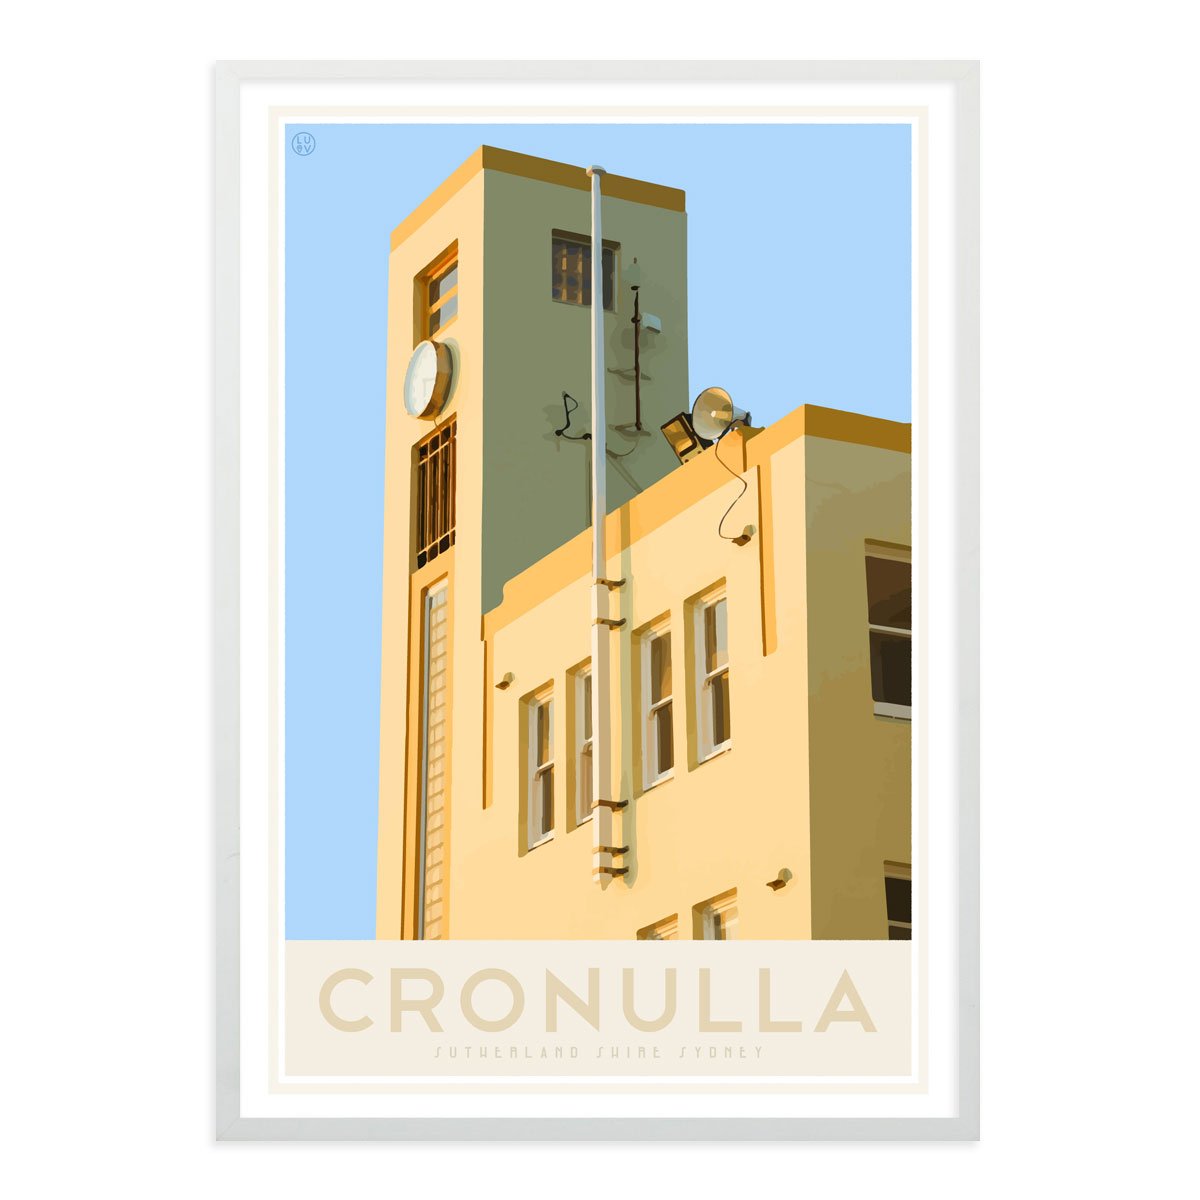 Cronulla Beach vintage travel style white framed print, designed by places we luv